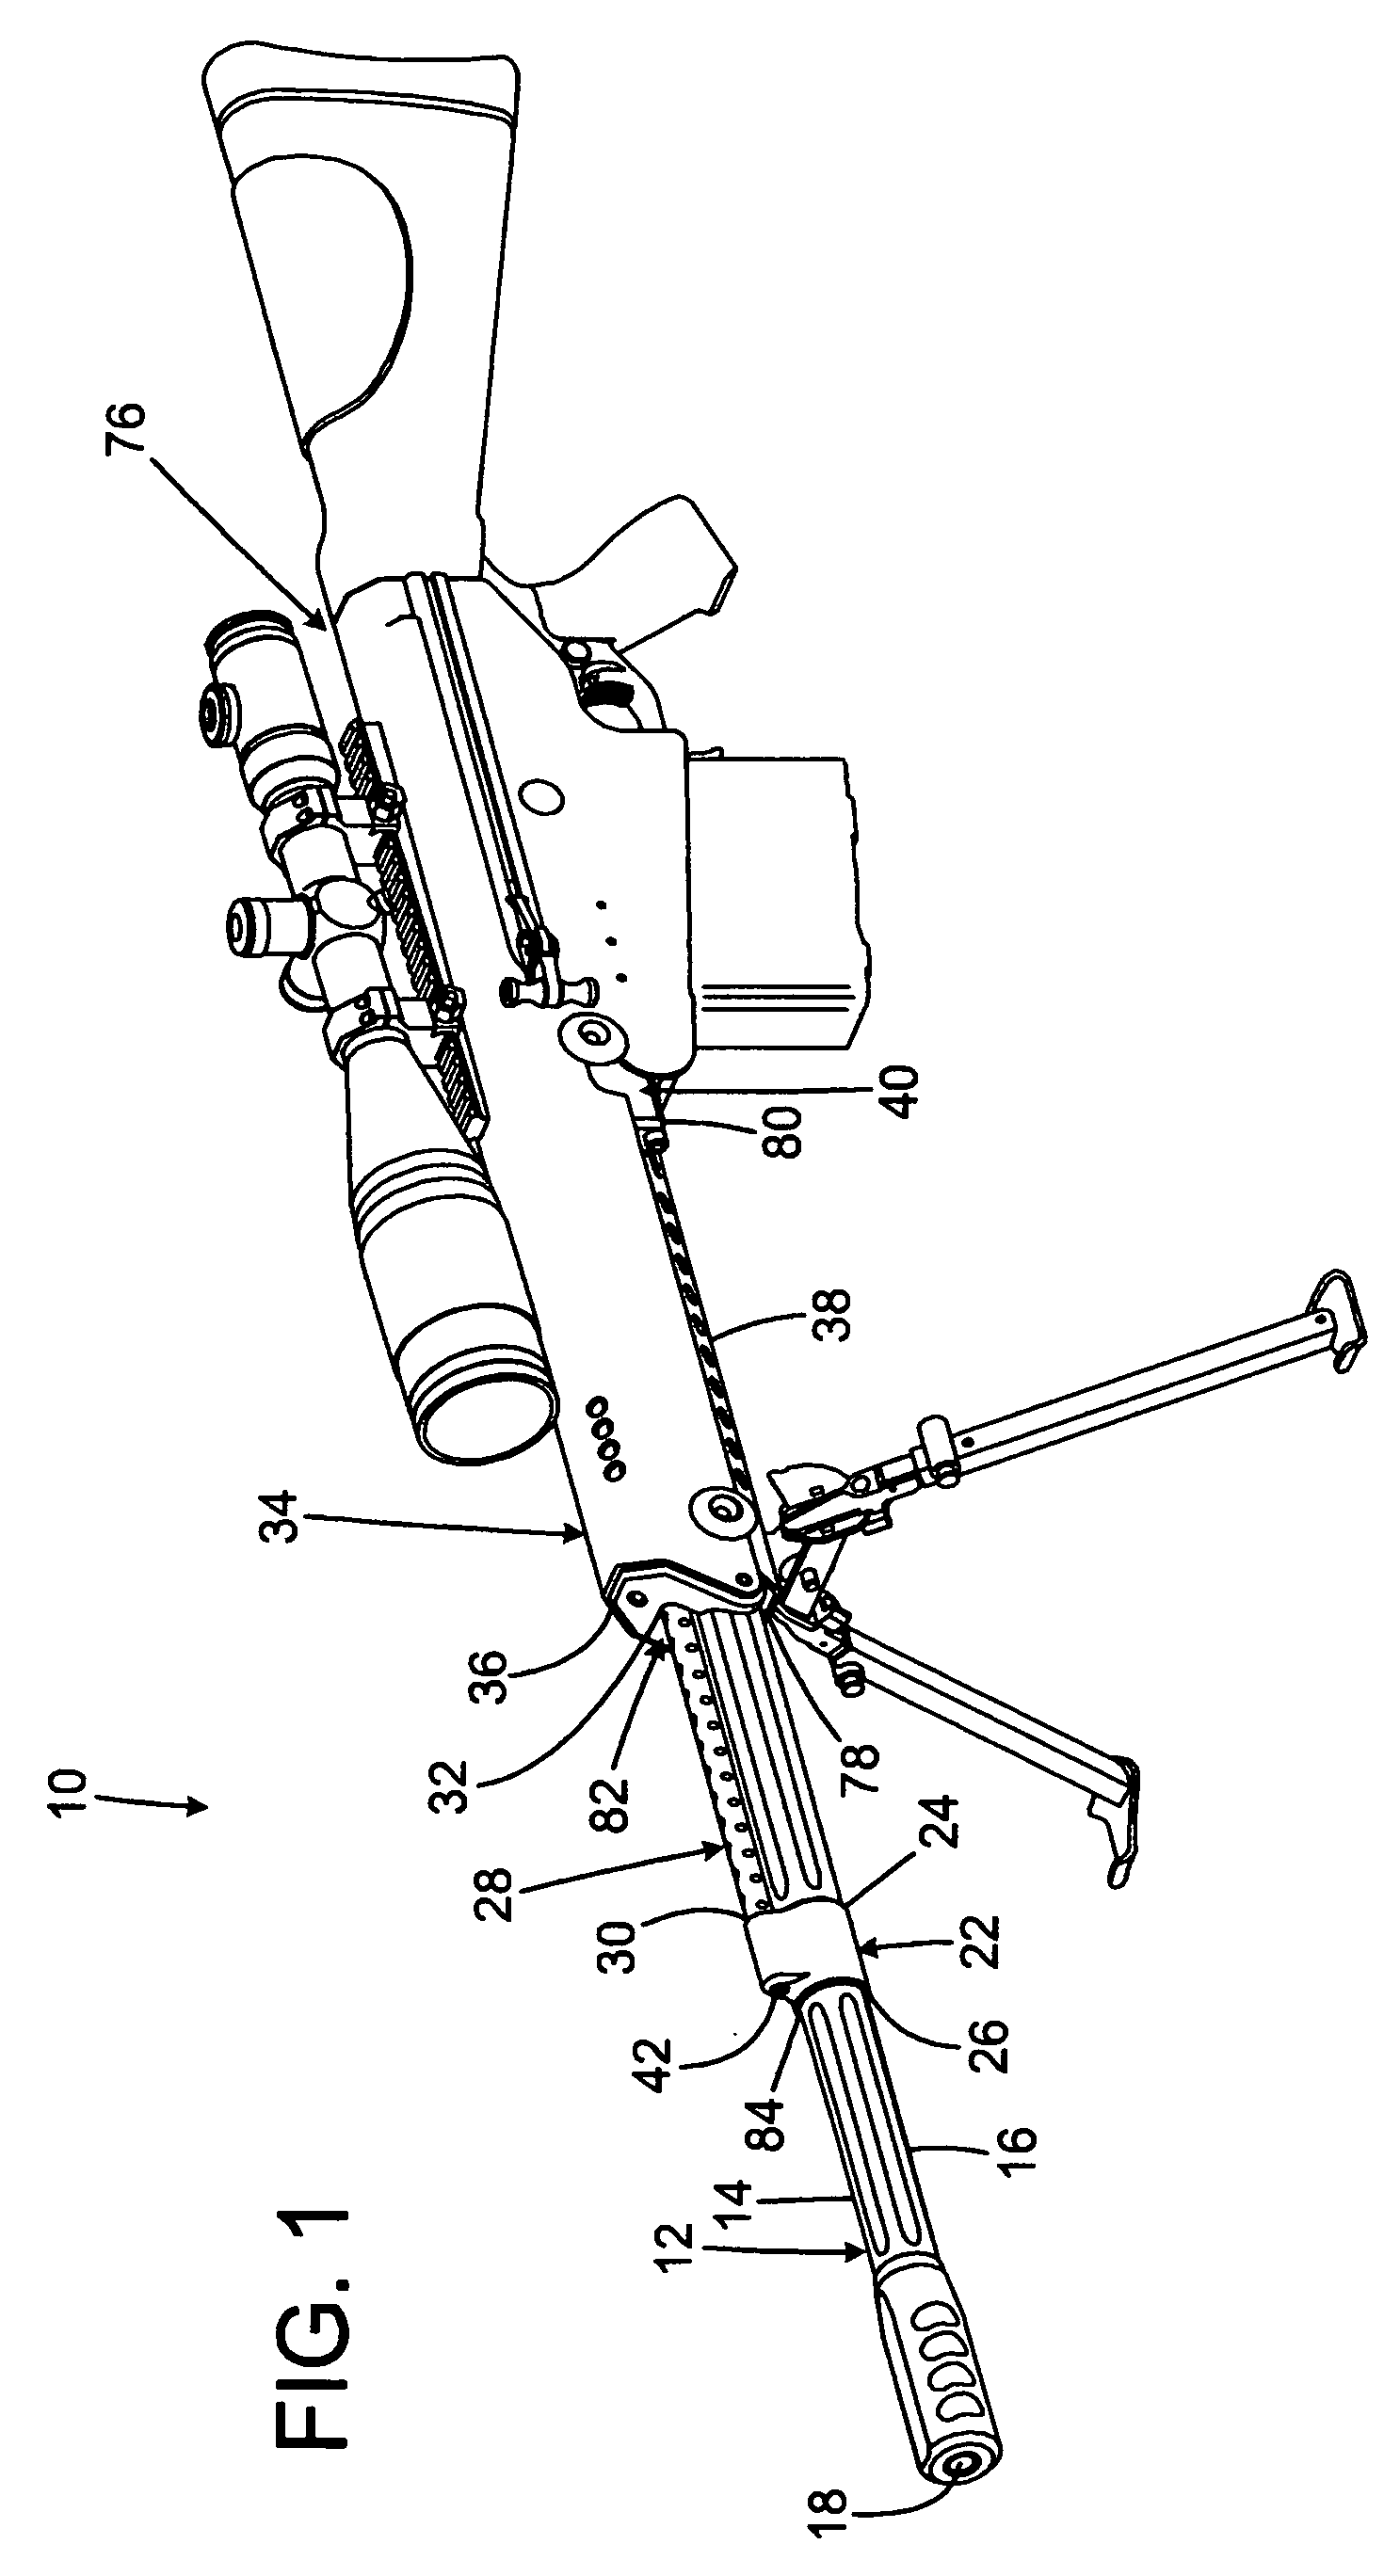 Gas operating system for a firearm